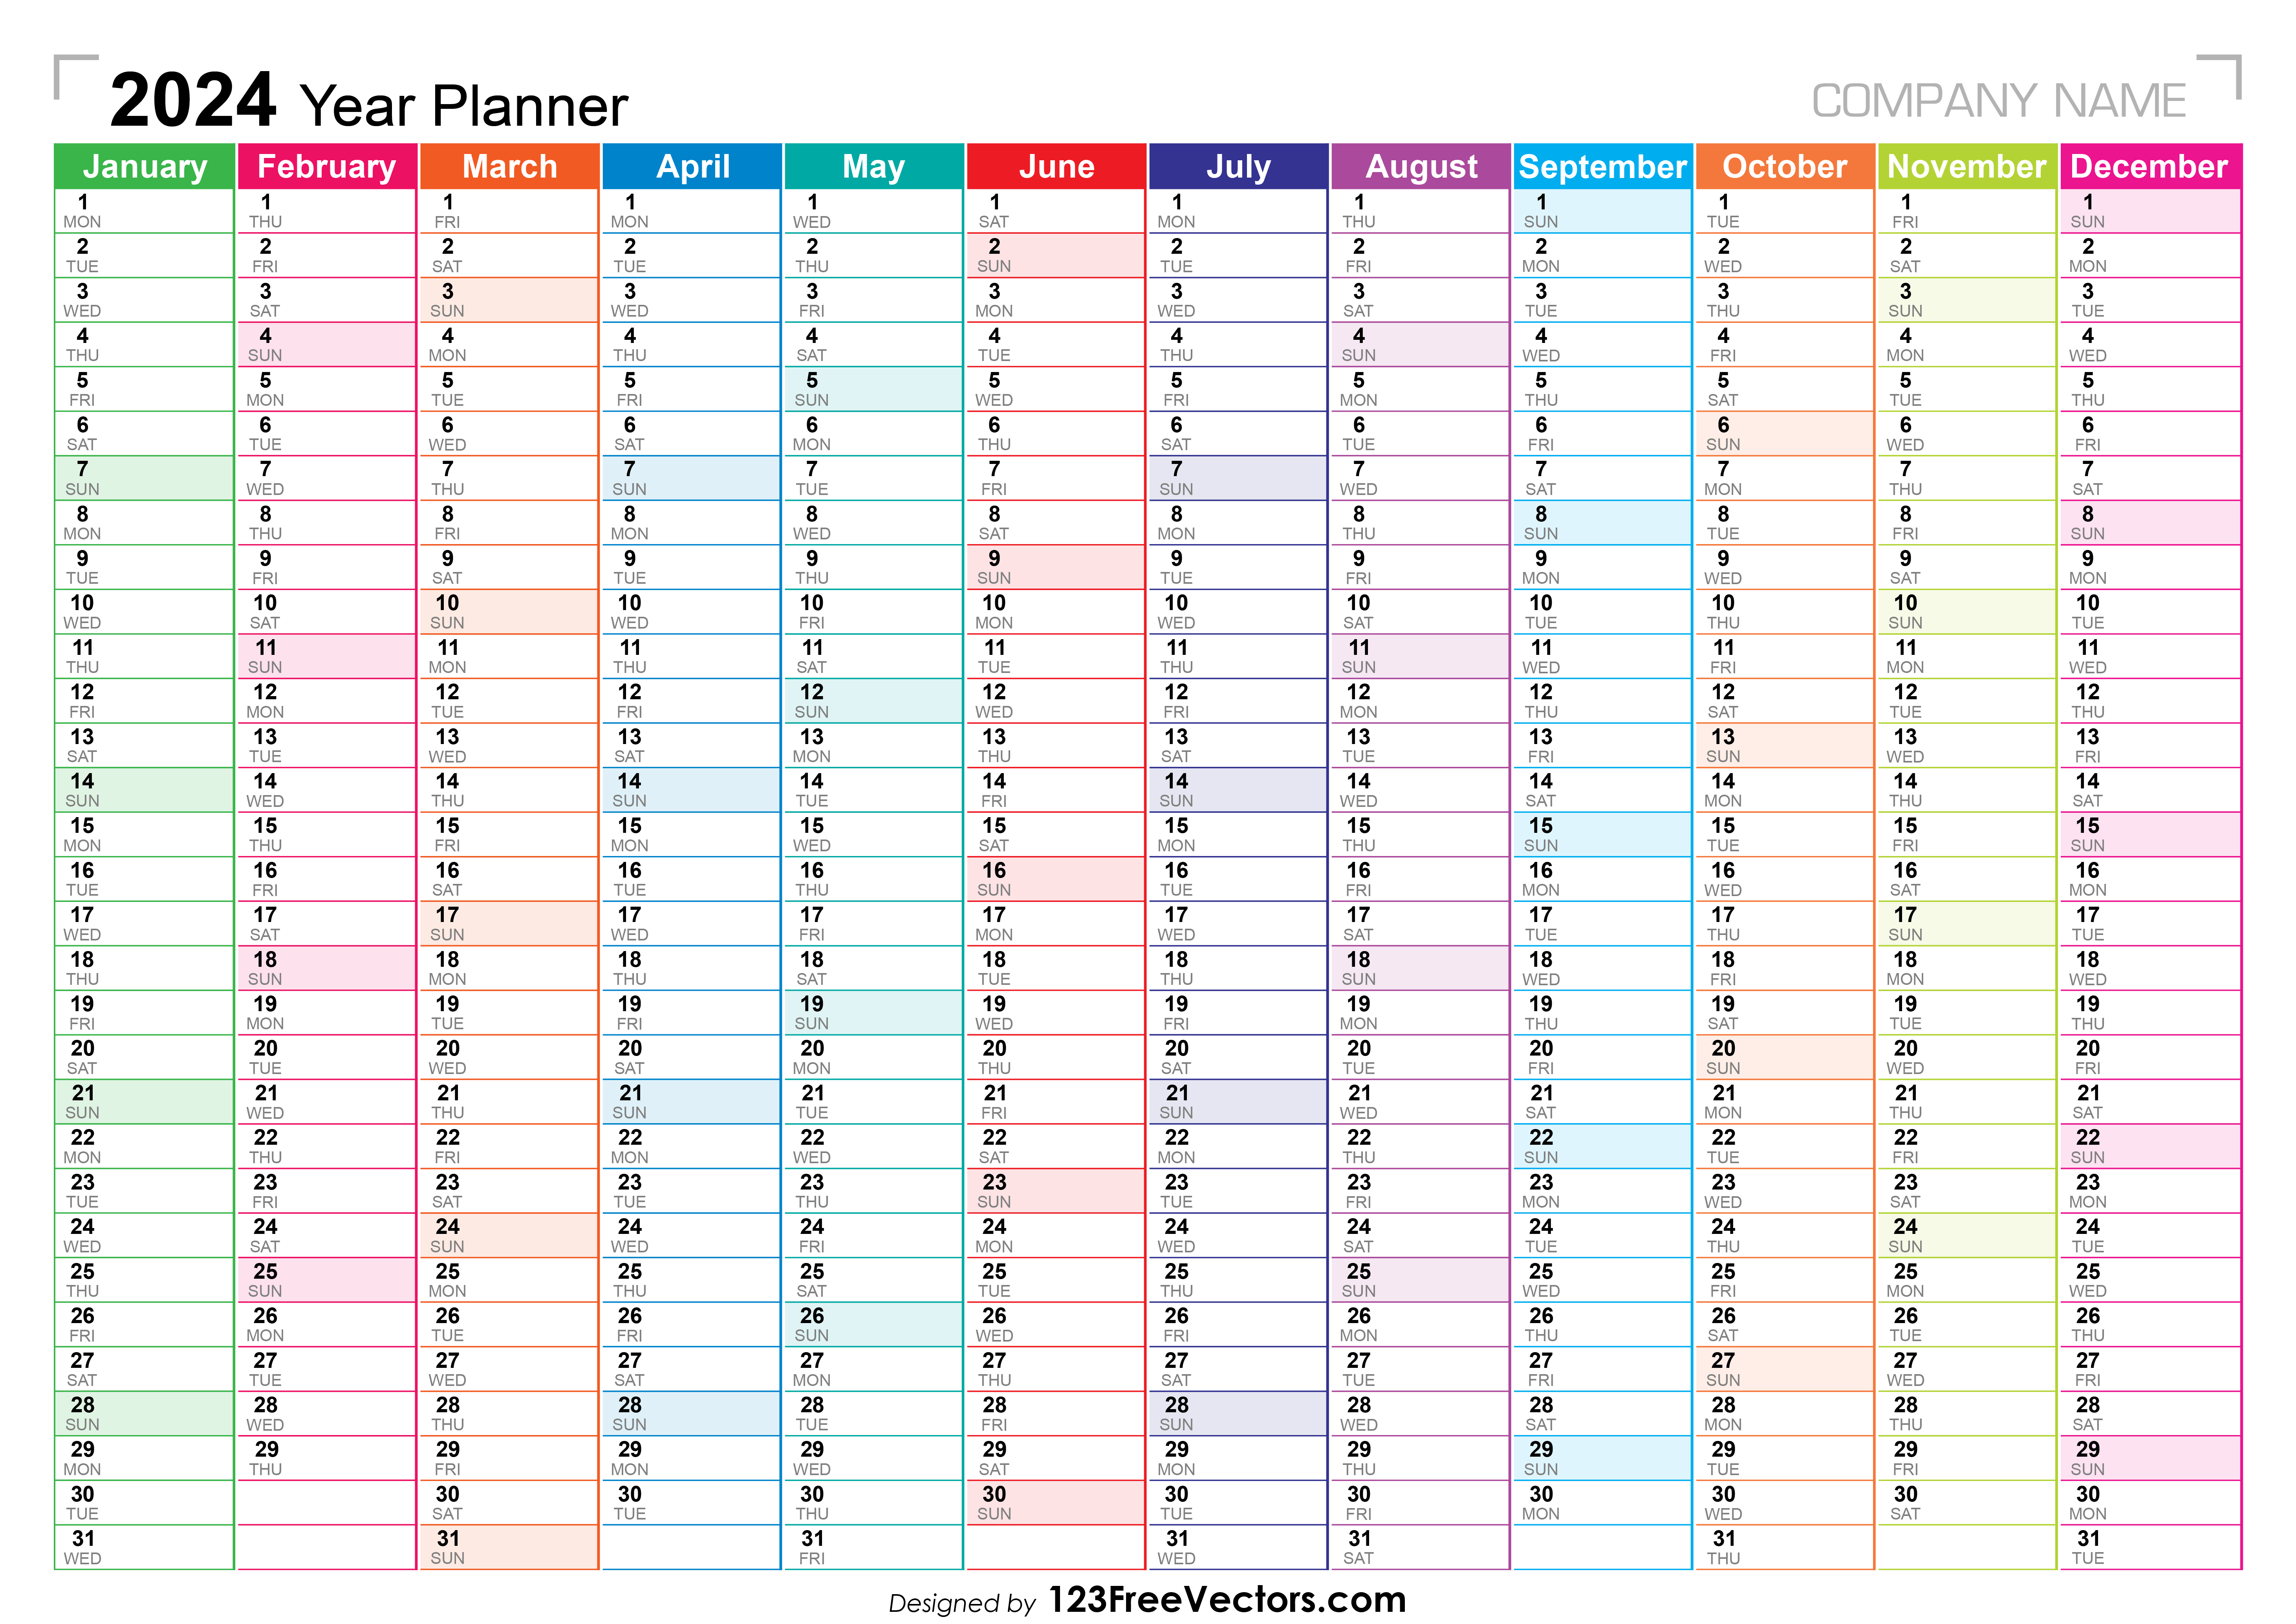 Planner Calendar for 2024. Wall Organizer, Yearly Template